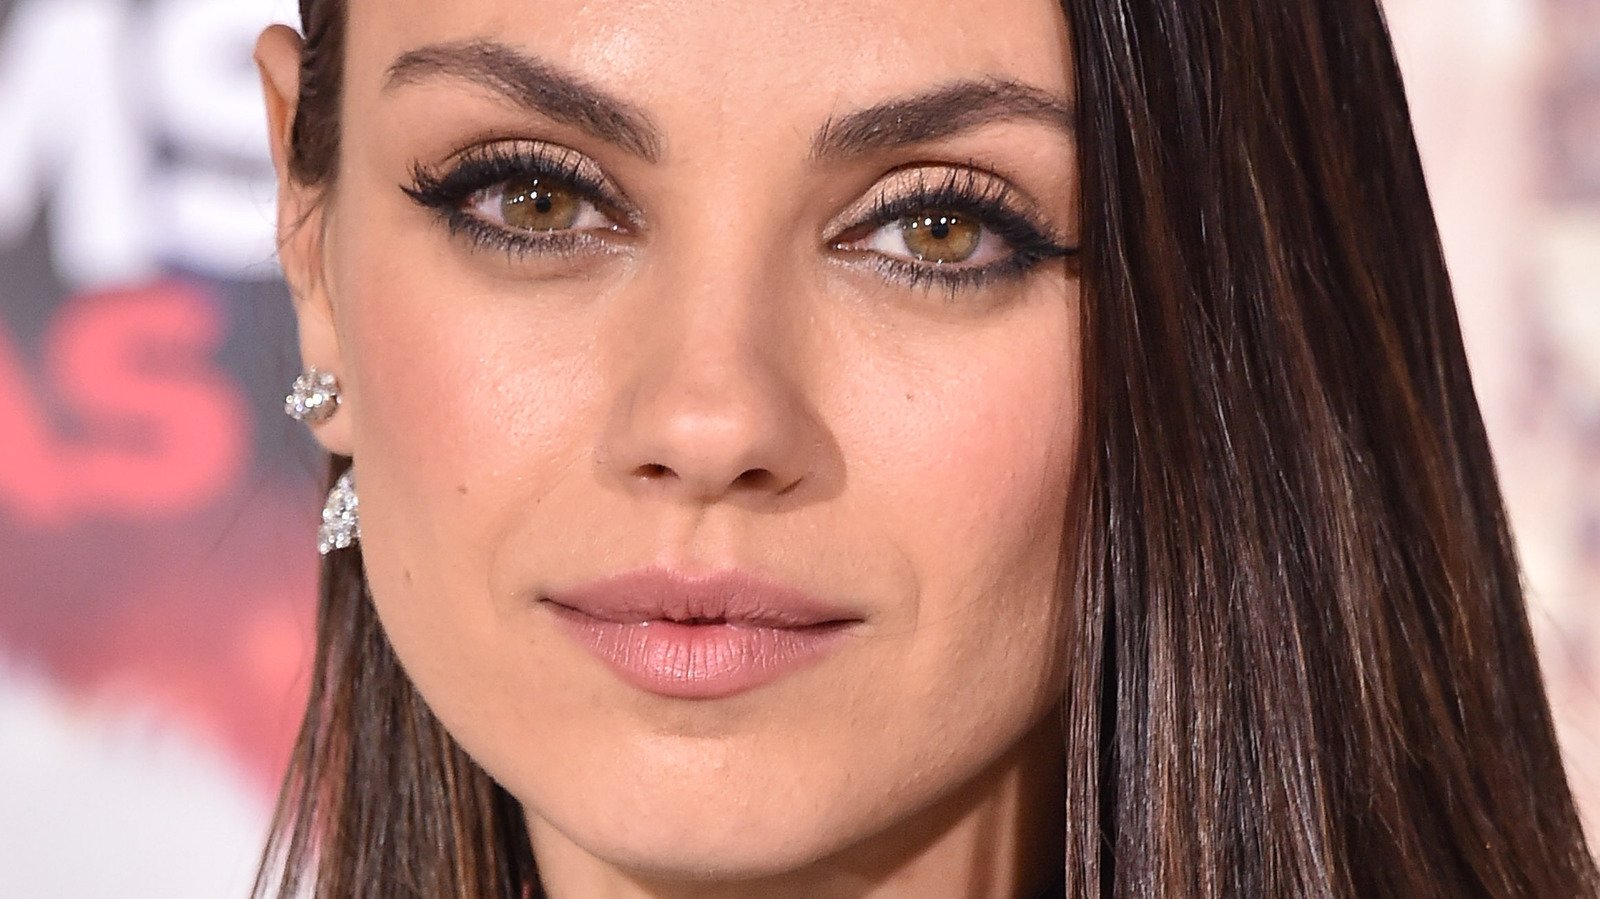 Here's What Mila Kunis Really Looks Like Without Makeup